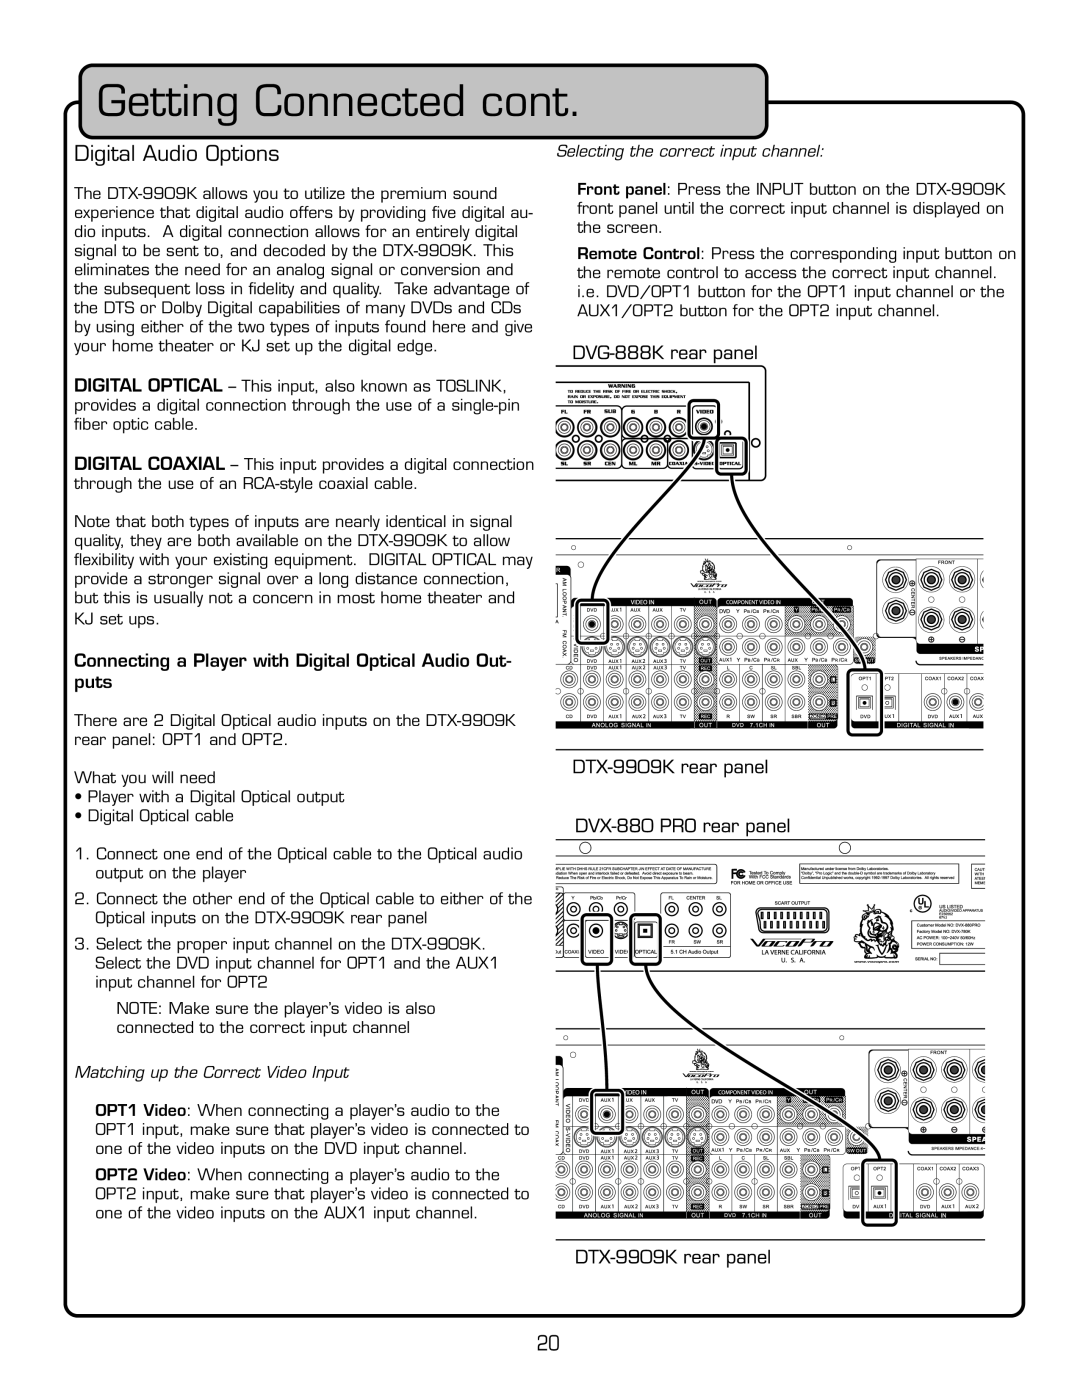 VocoPro DTX-9909K owner manual Getting Connected cont, Digital Audio Options, puts, Matching up the Correct Video Input 